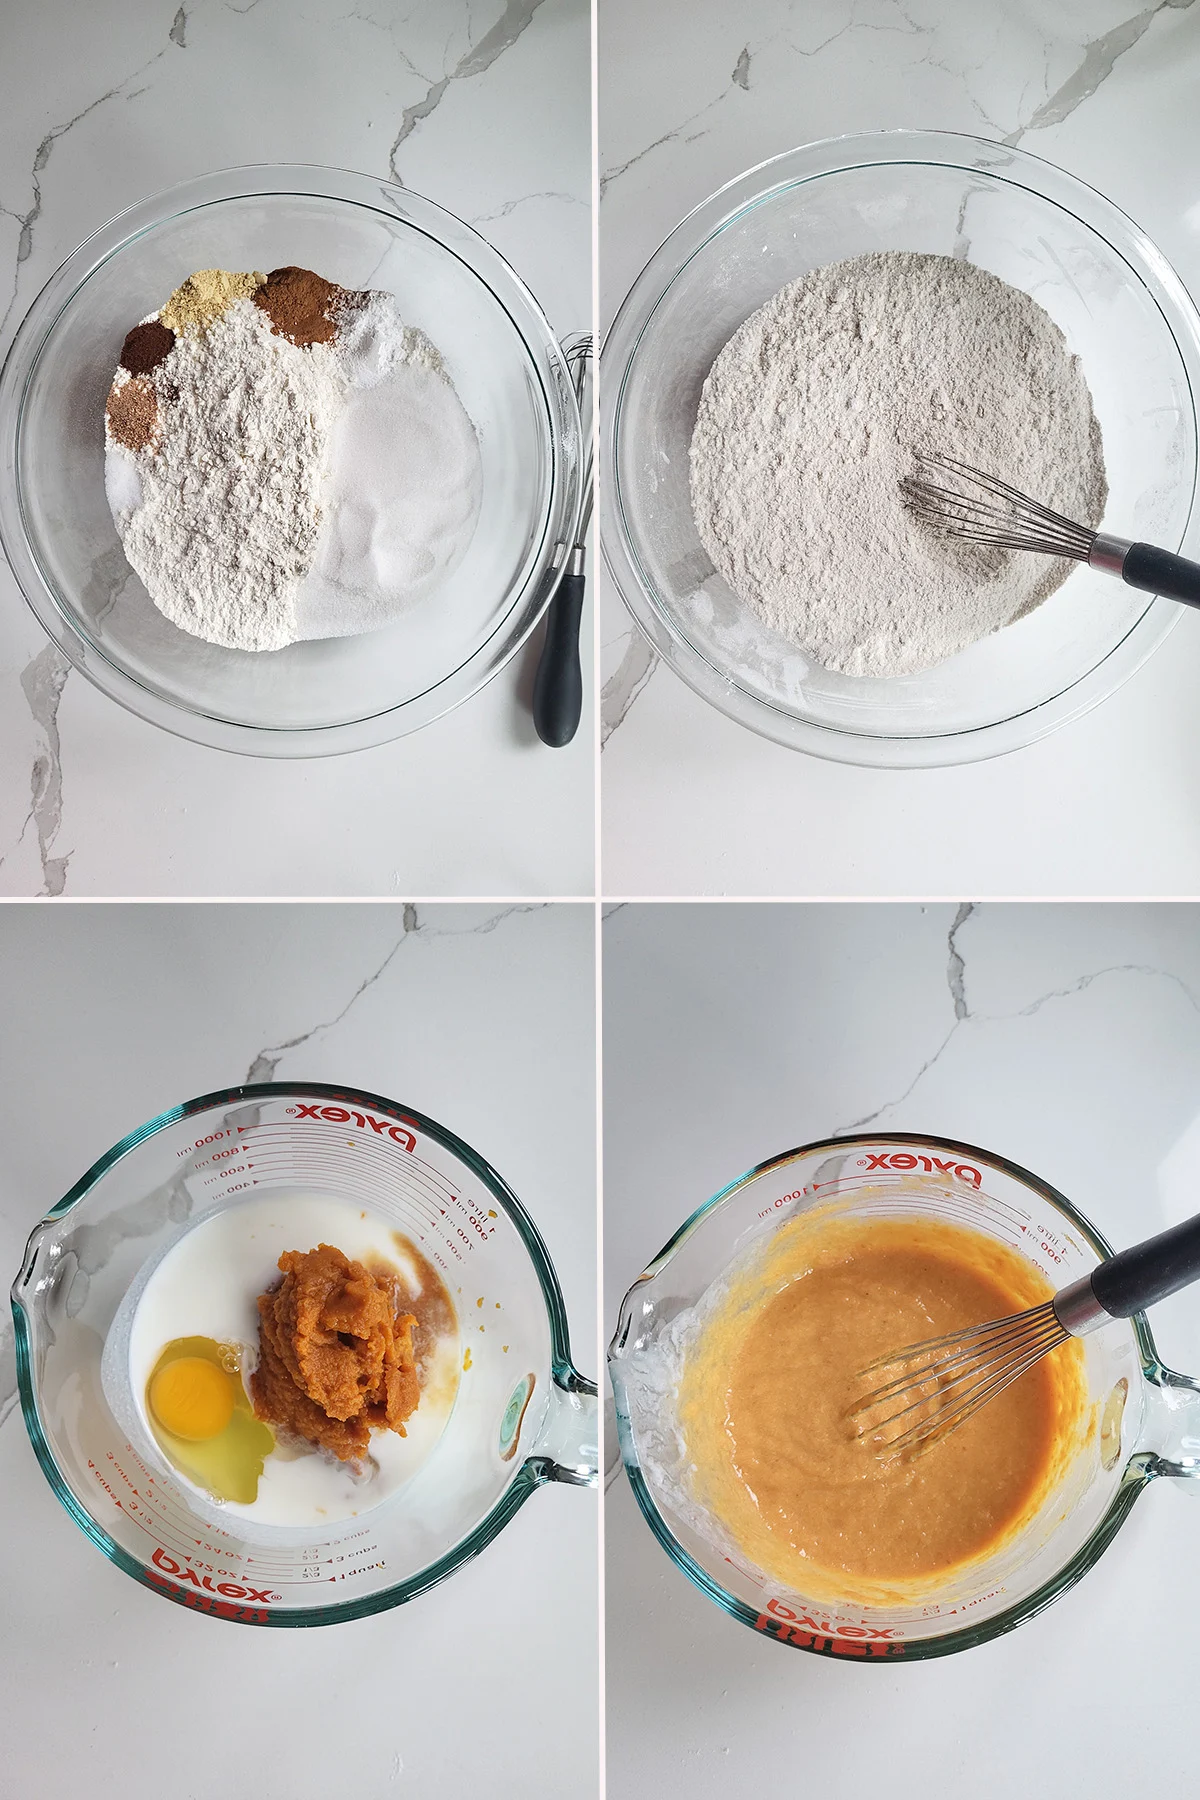 Dry ingredients in a bowl and wet ingredients in a measuring cup.